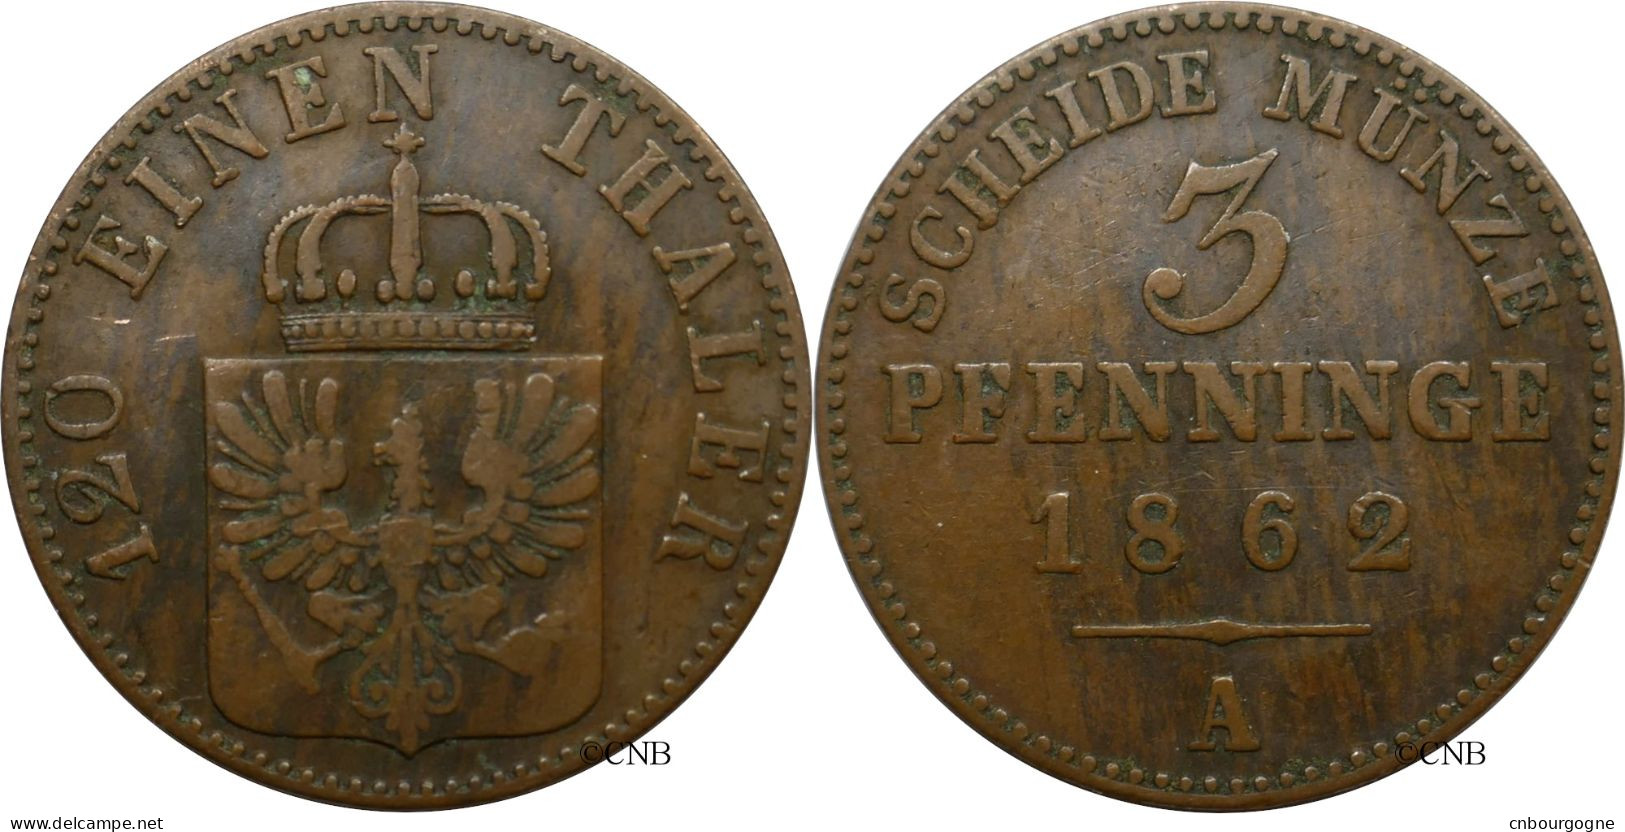 Allemagne - Prusse / Preussen - Guillaume Ier / Wilhelm I. - 3 Pfenninge / 1/120 Thaler 1862 A - TTB/XF40 - Mon6090 - Small Coins & Other Subdivisions